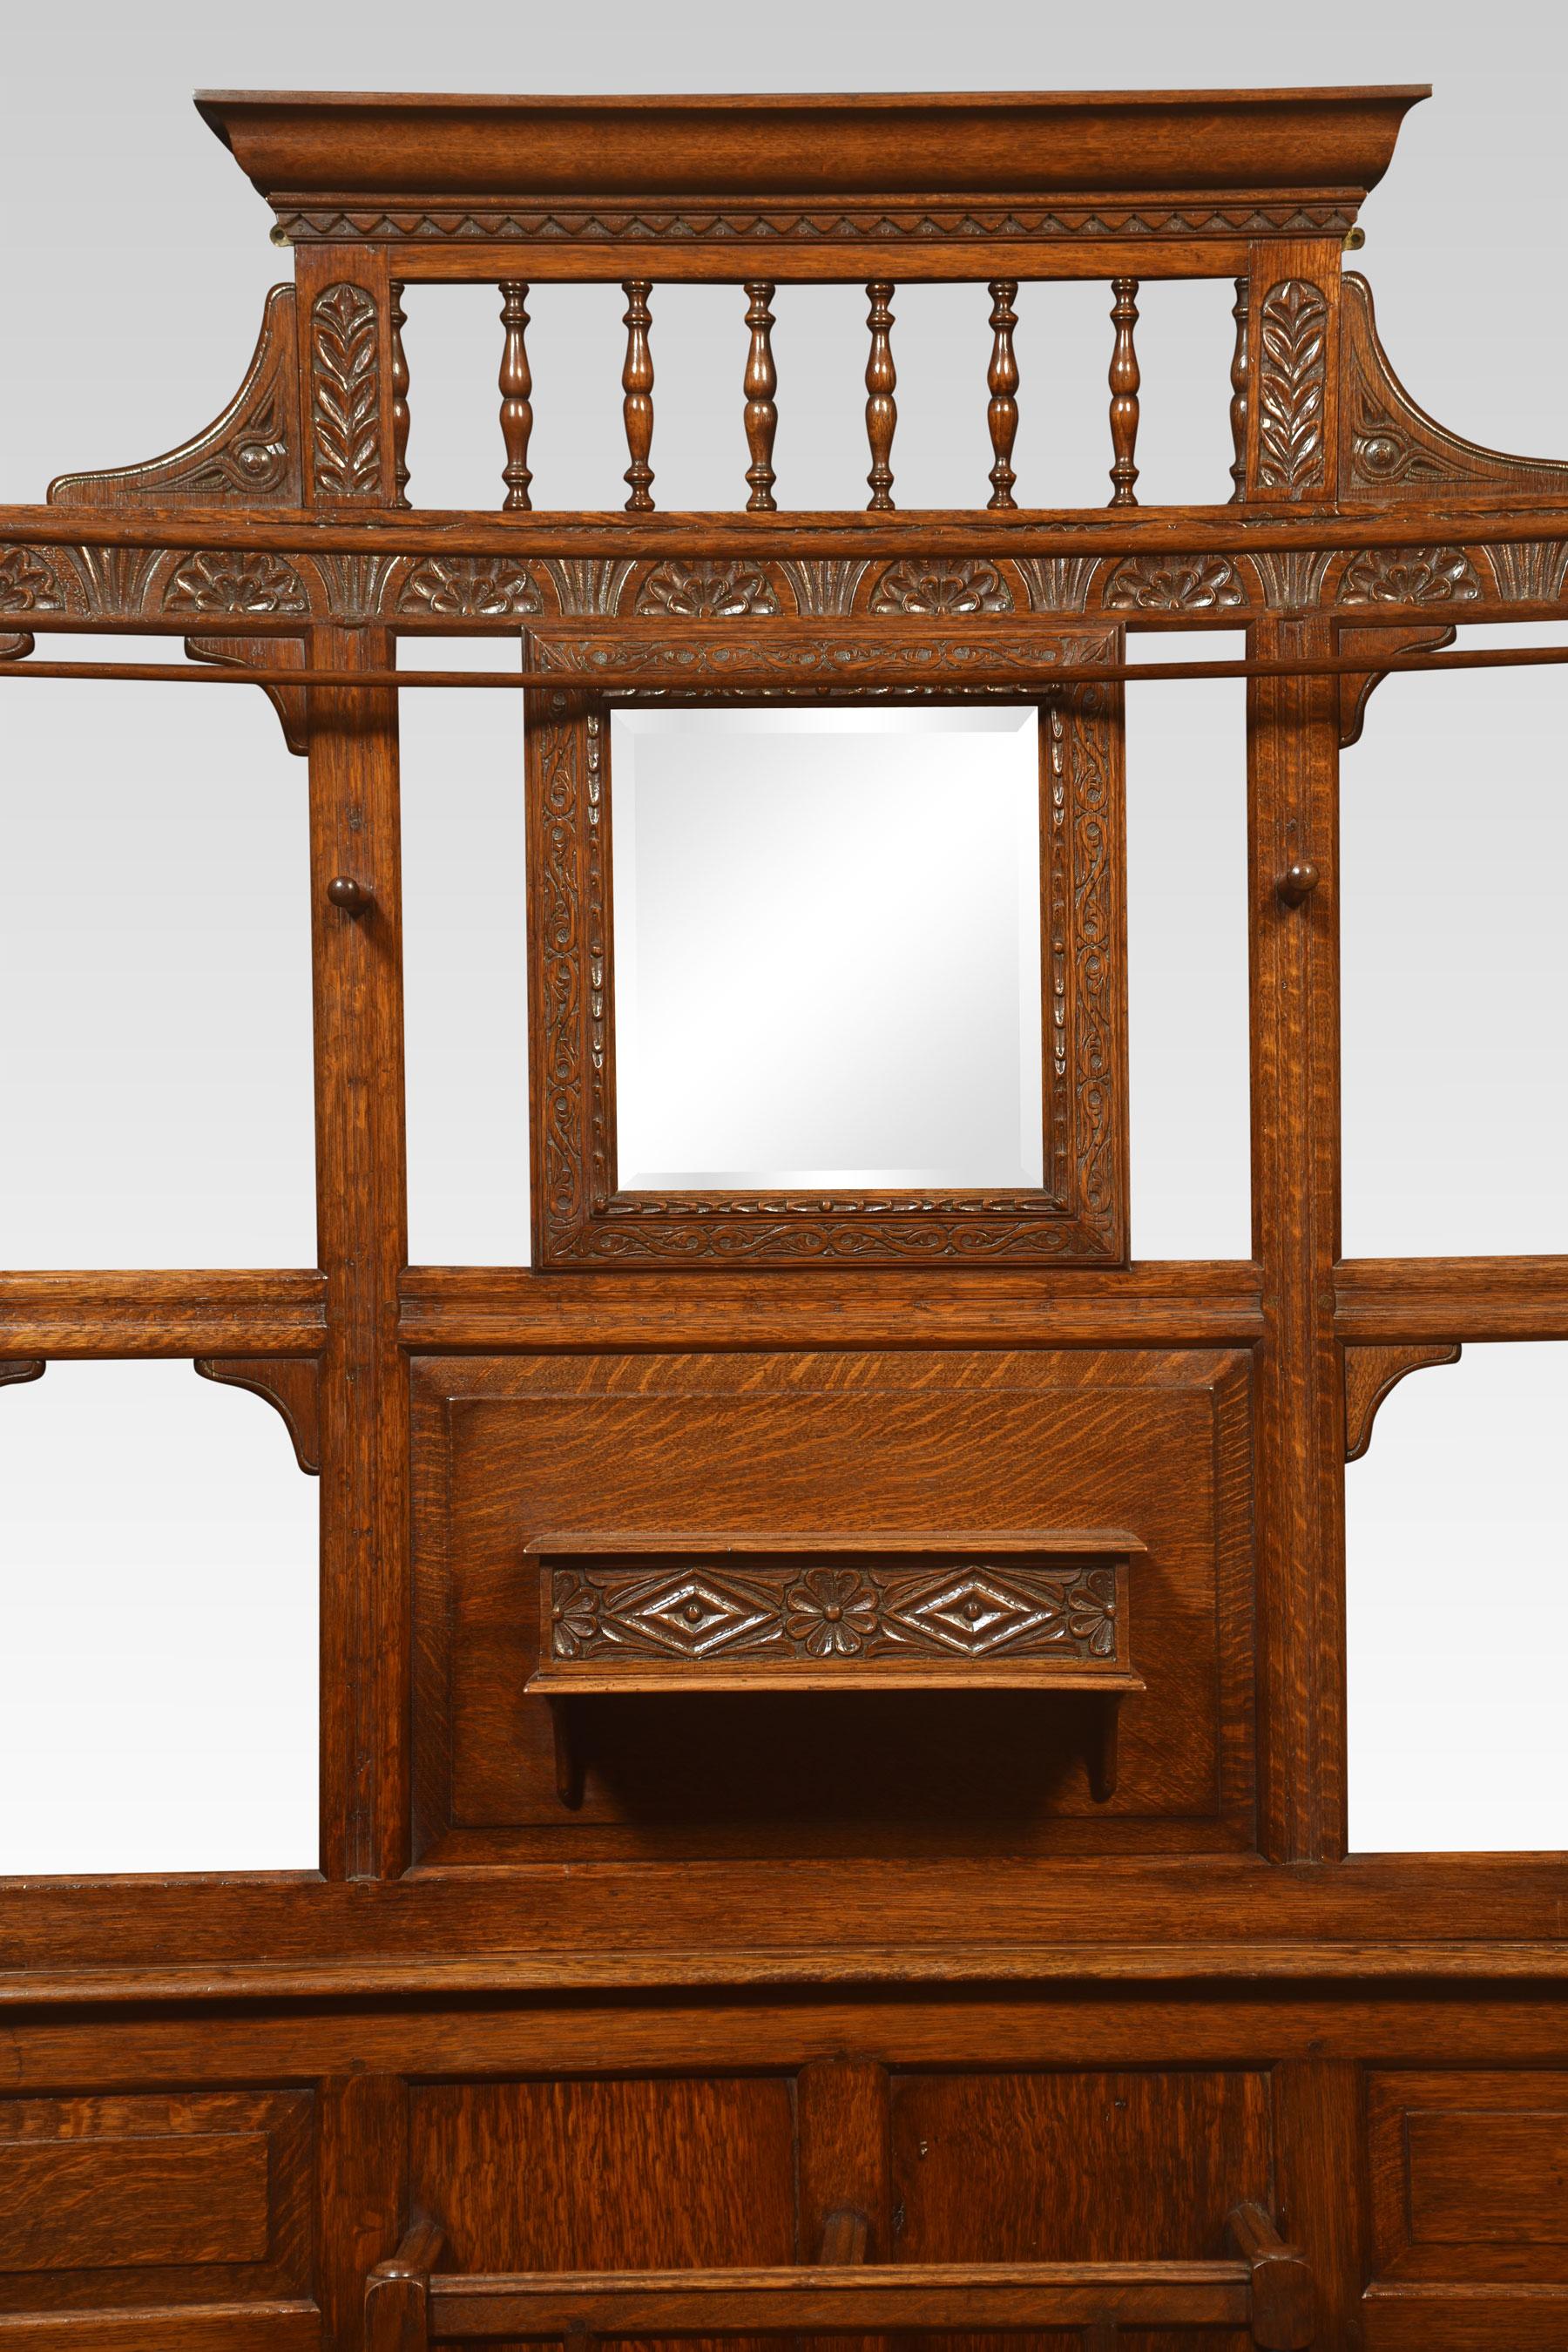 Oak hallstand, the superstructure with a central square beveled mirror surrounded by turned hooks and glove box. The base section having an umbrella stand and carved scrolling panel. All raised up on a plinth base.
Dimensions
Height 82